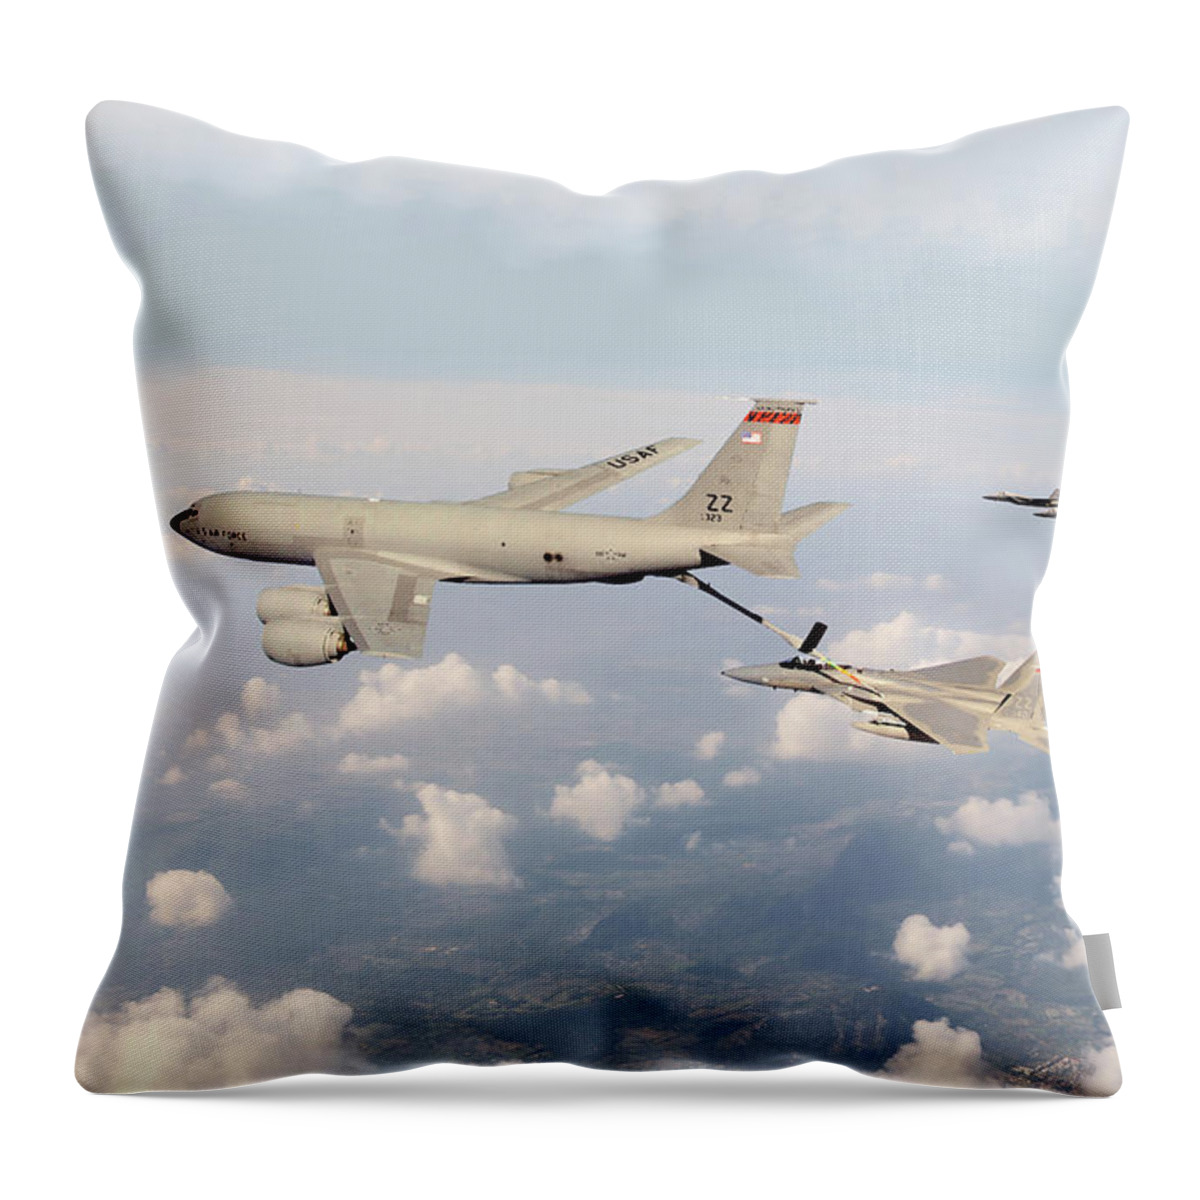 Kc-135 Stratotanker Throw Pillow featuring the digital art Young Tigers by Airpower Art